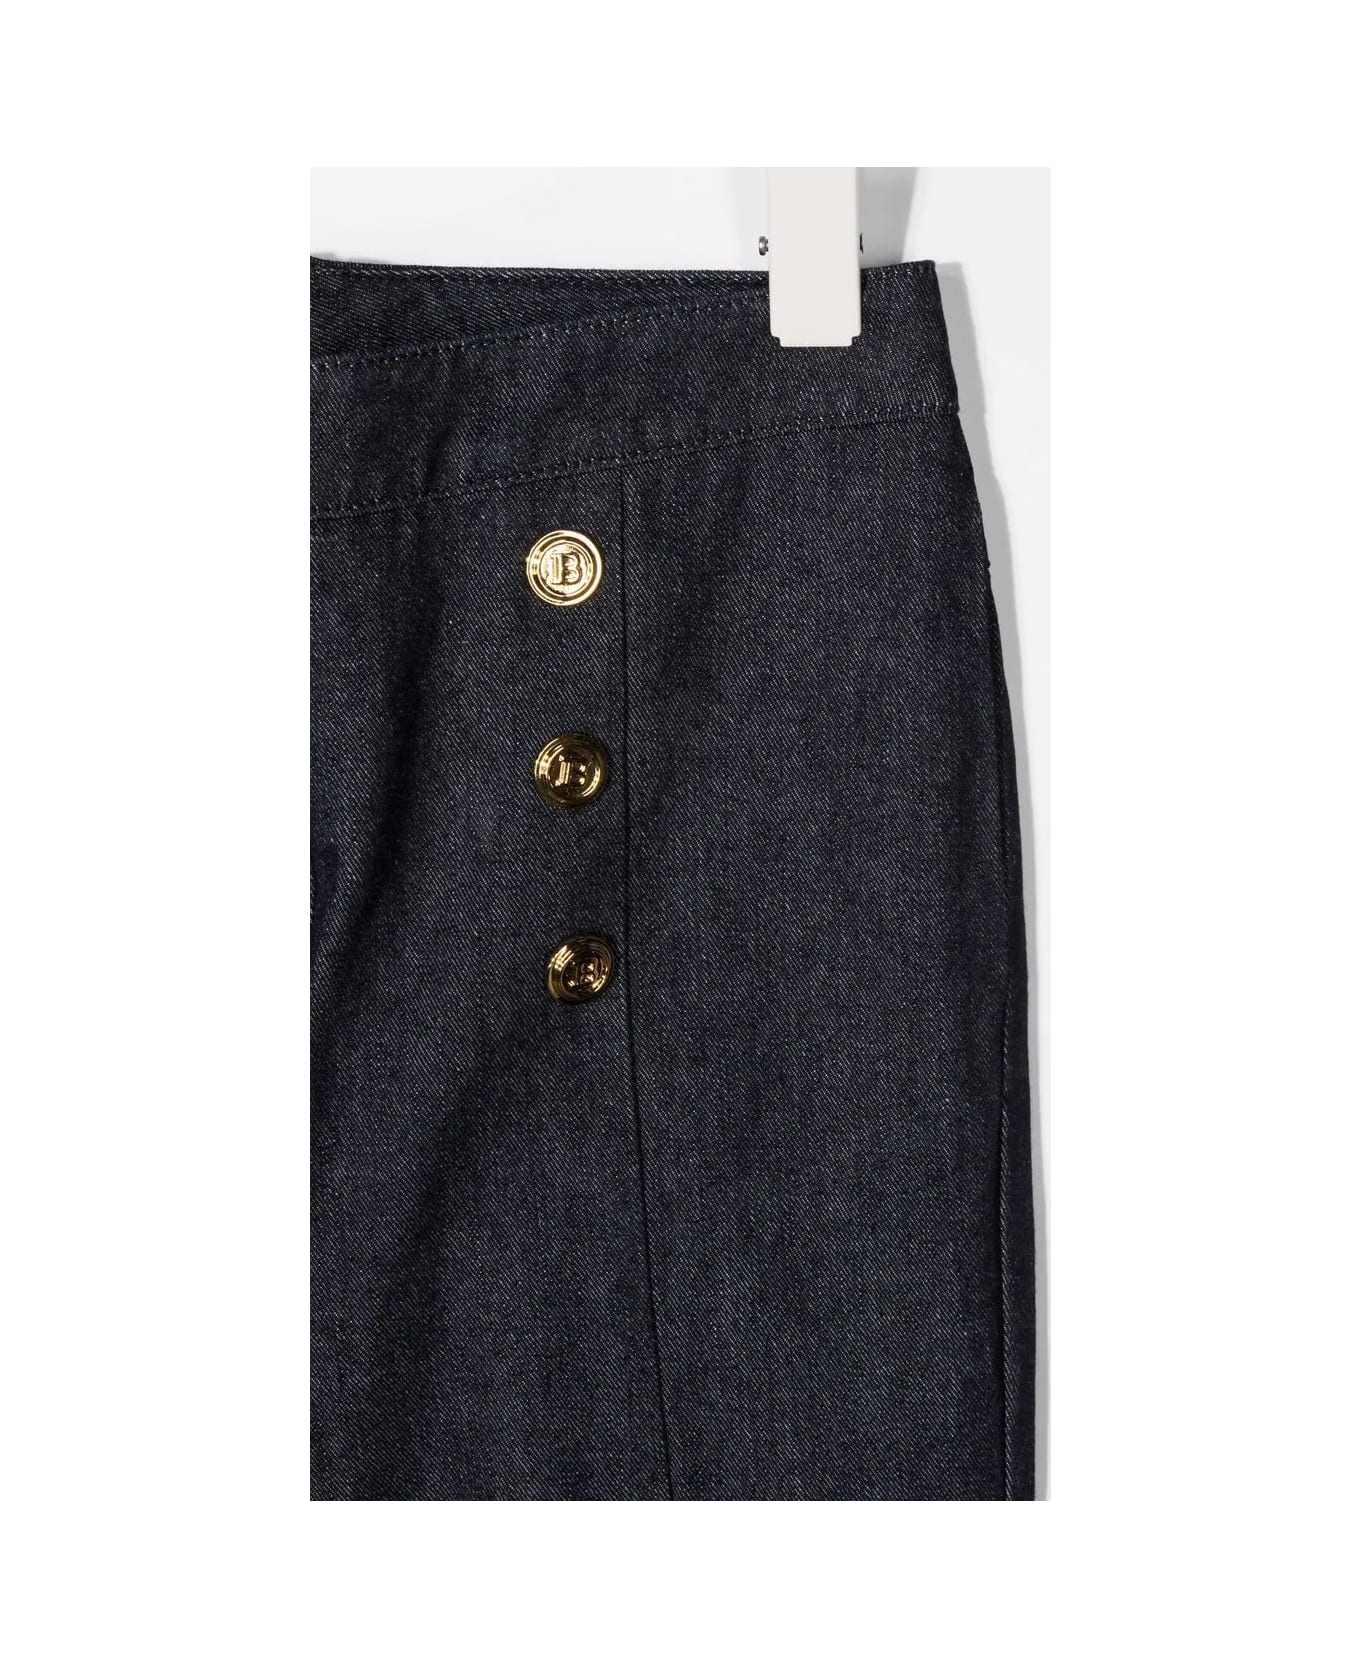 Balmain Navy Blue Kids Tapered Trousers With Golden Embossed Buttons - Blu navy